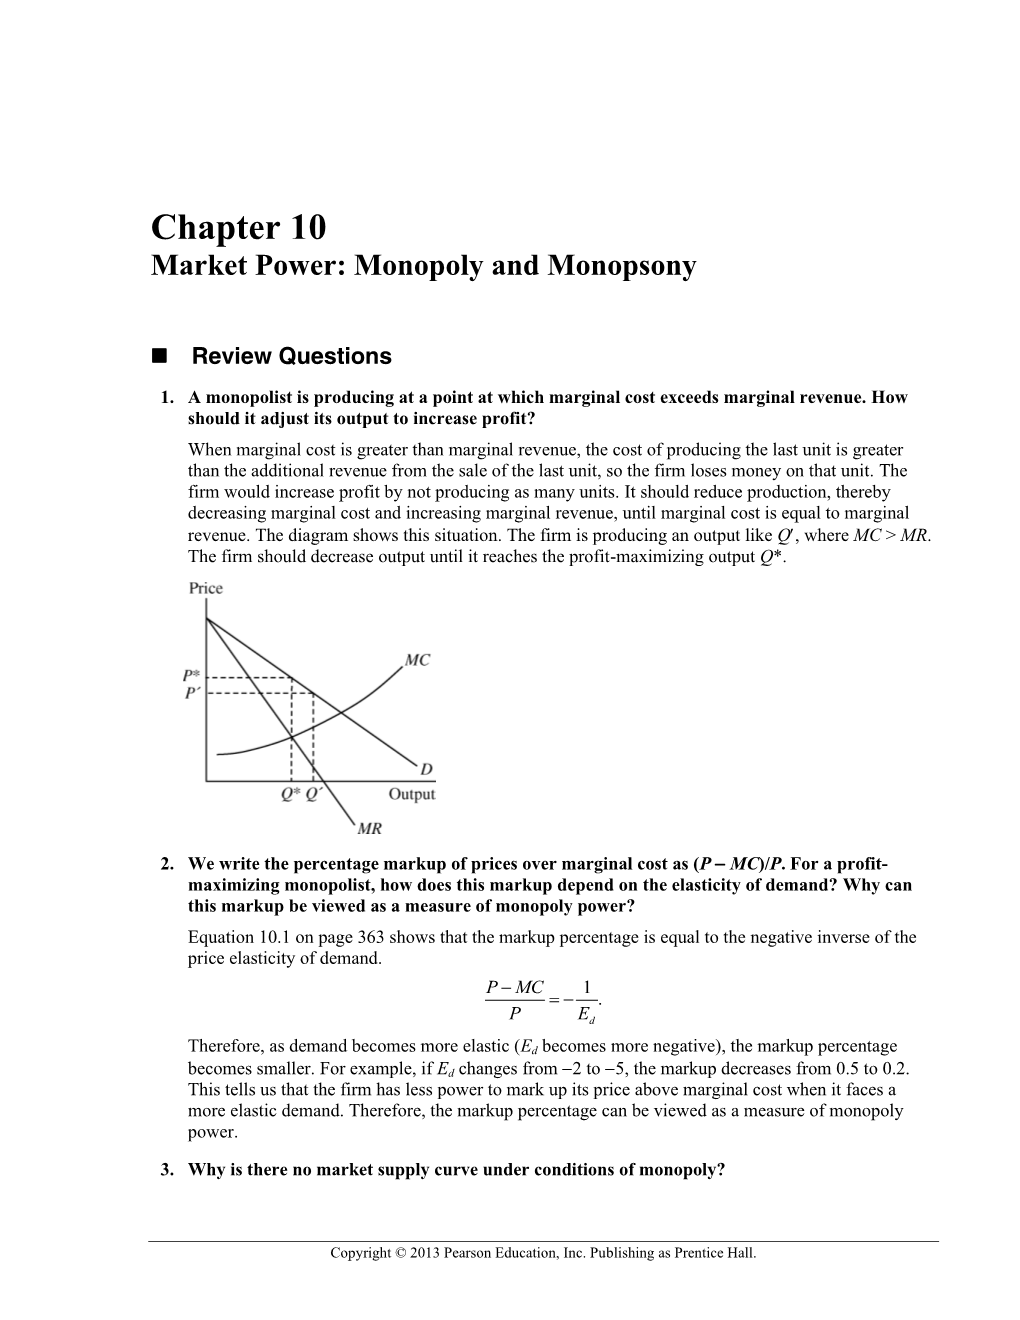 Chapter 10 Market Power: Monopoly and Monopsony